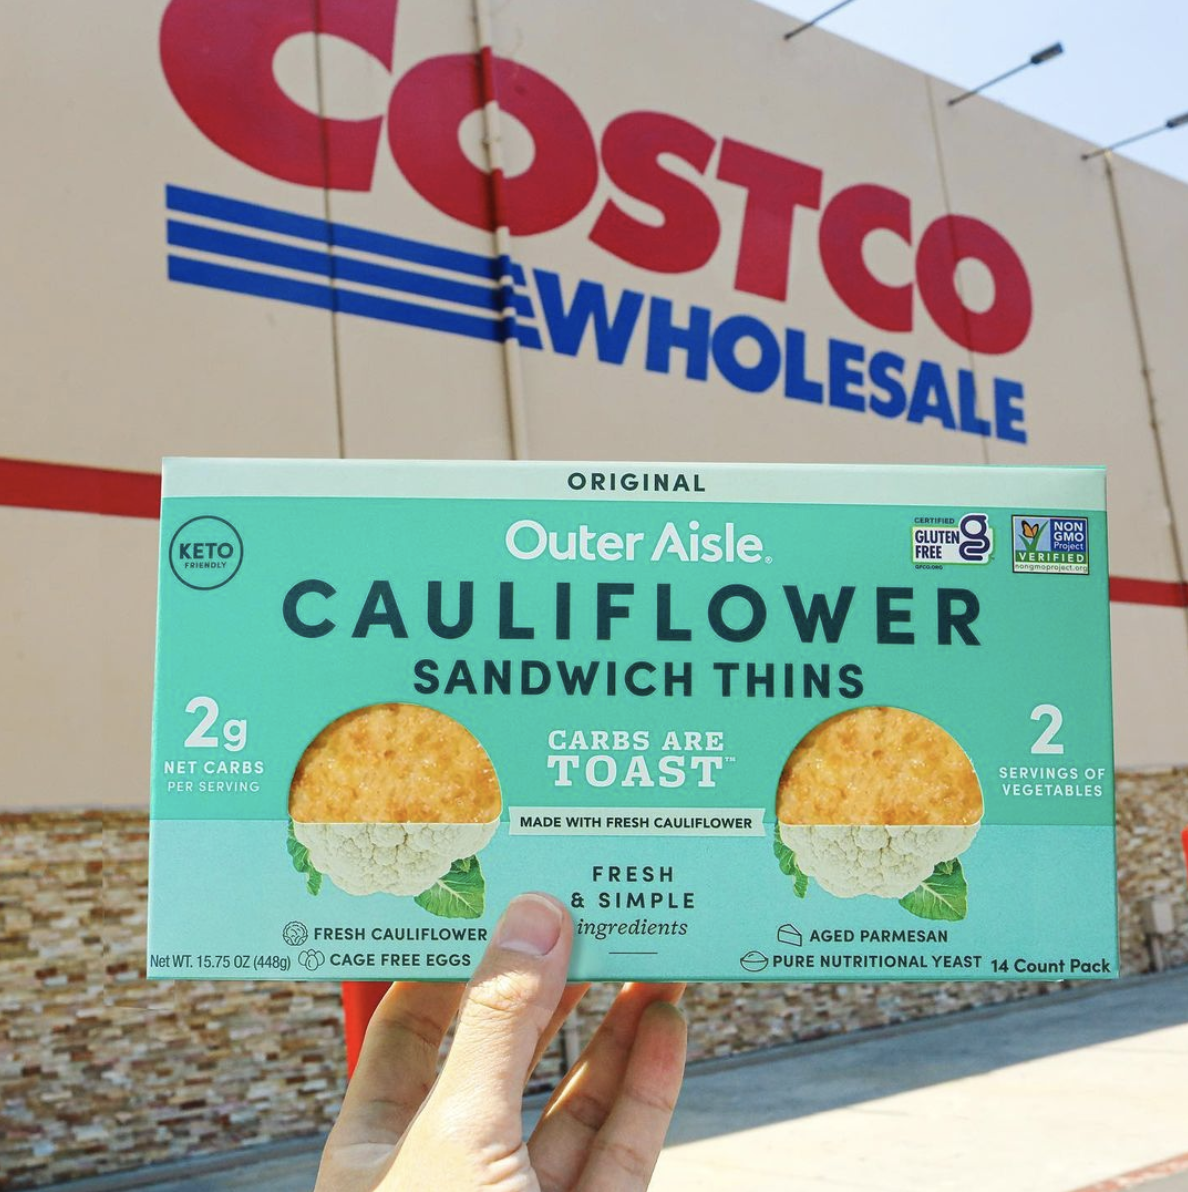 Costco Is Currently Selling Low-Card Cauliflower Sandwich Thins